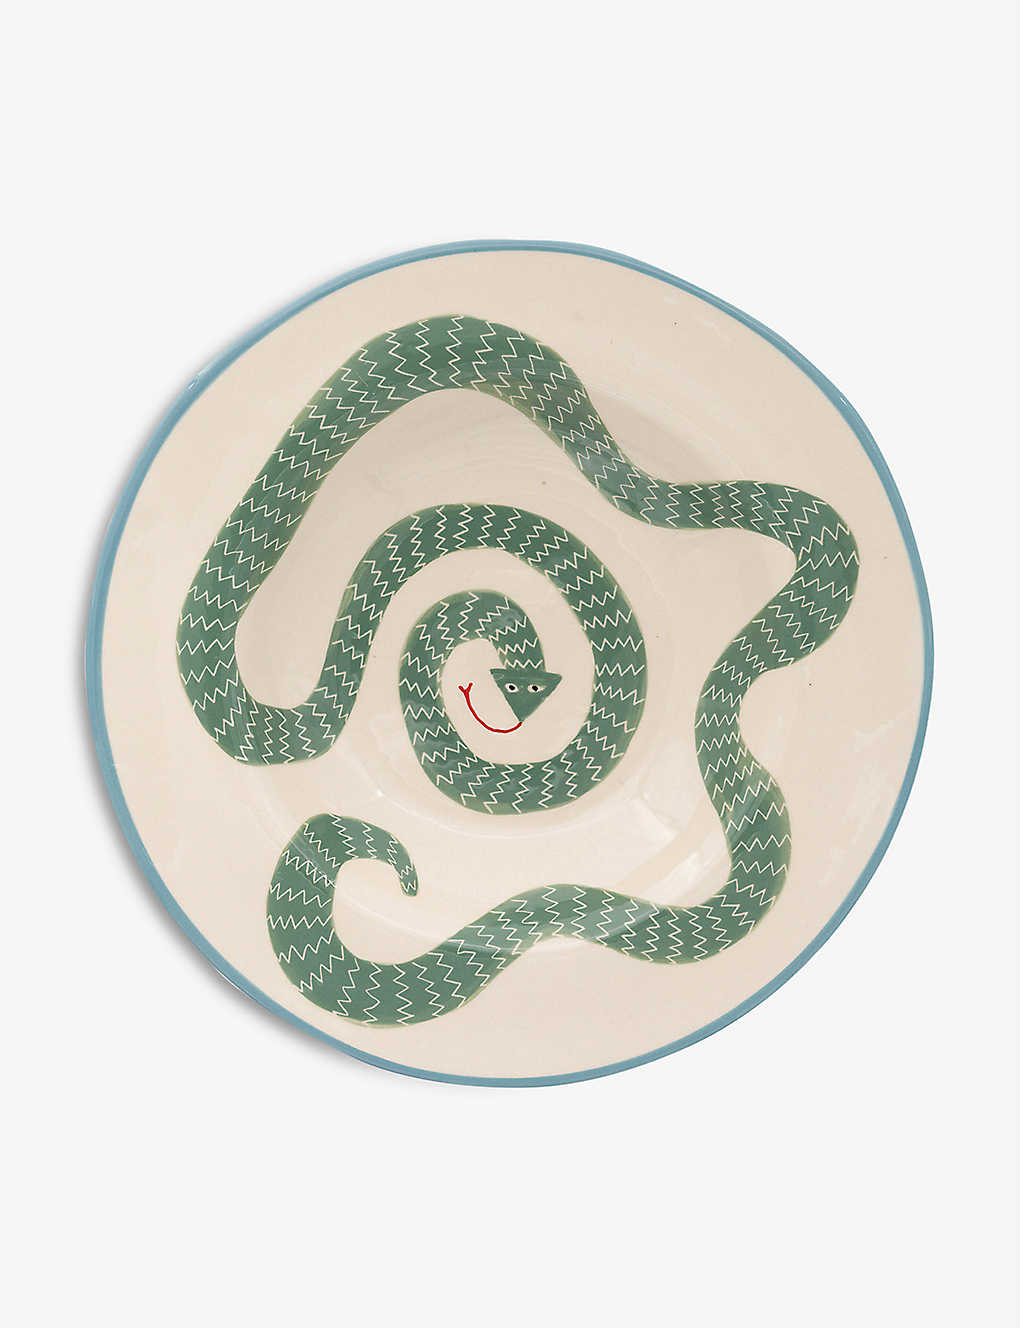 LAETITIA ROUGET Xj[L[[ 菑Z~bNv[g 26cm Sneaky You hand-painted ceramic plate 26cm